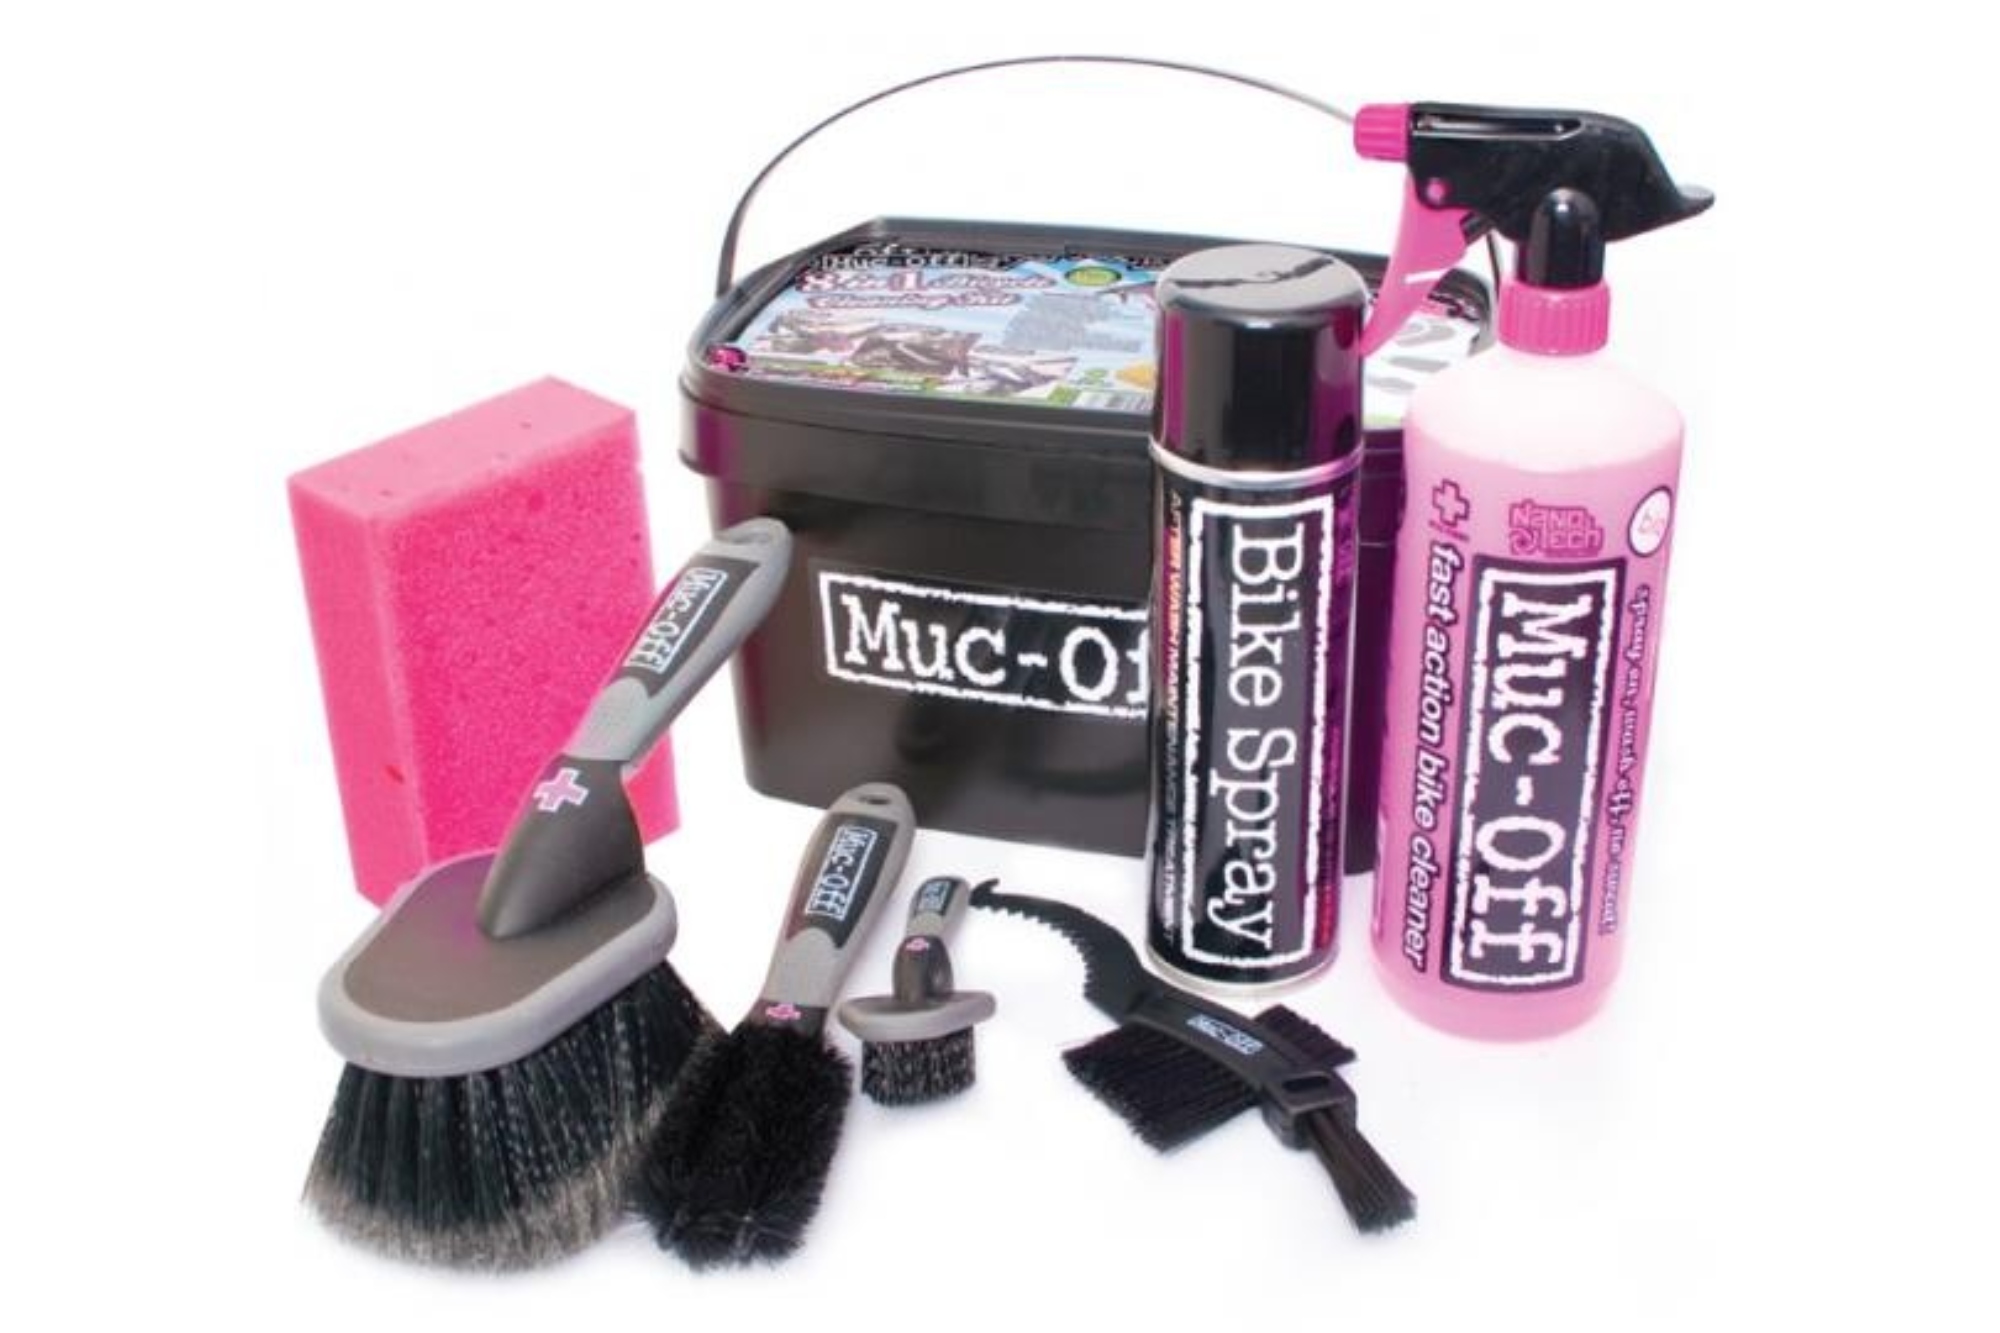 8 in 1 Muc Off cleaning kit items all out on display